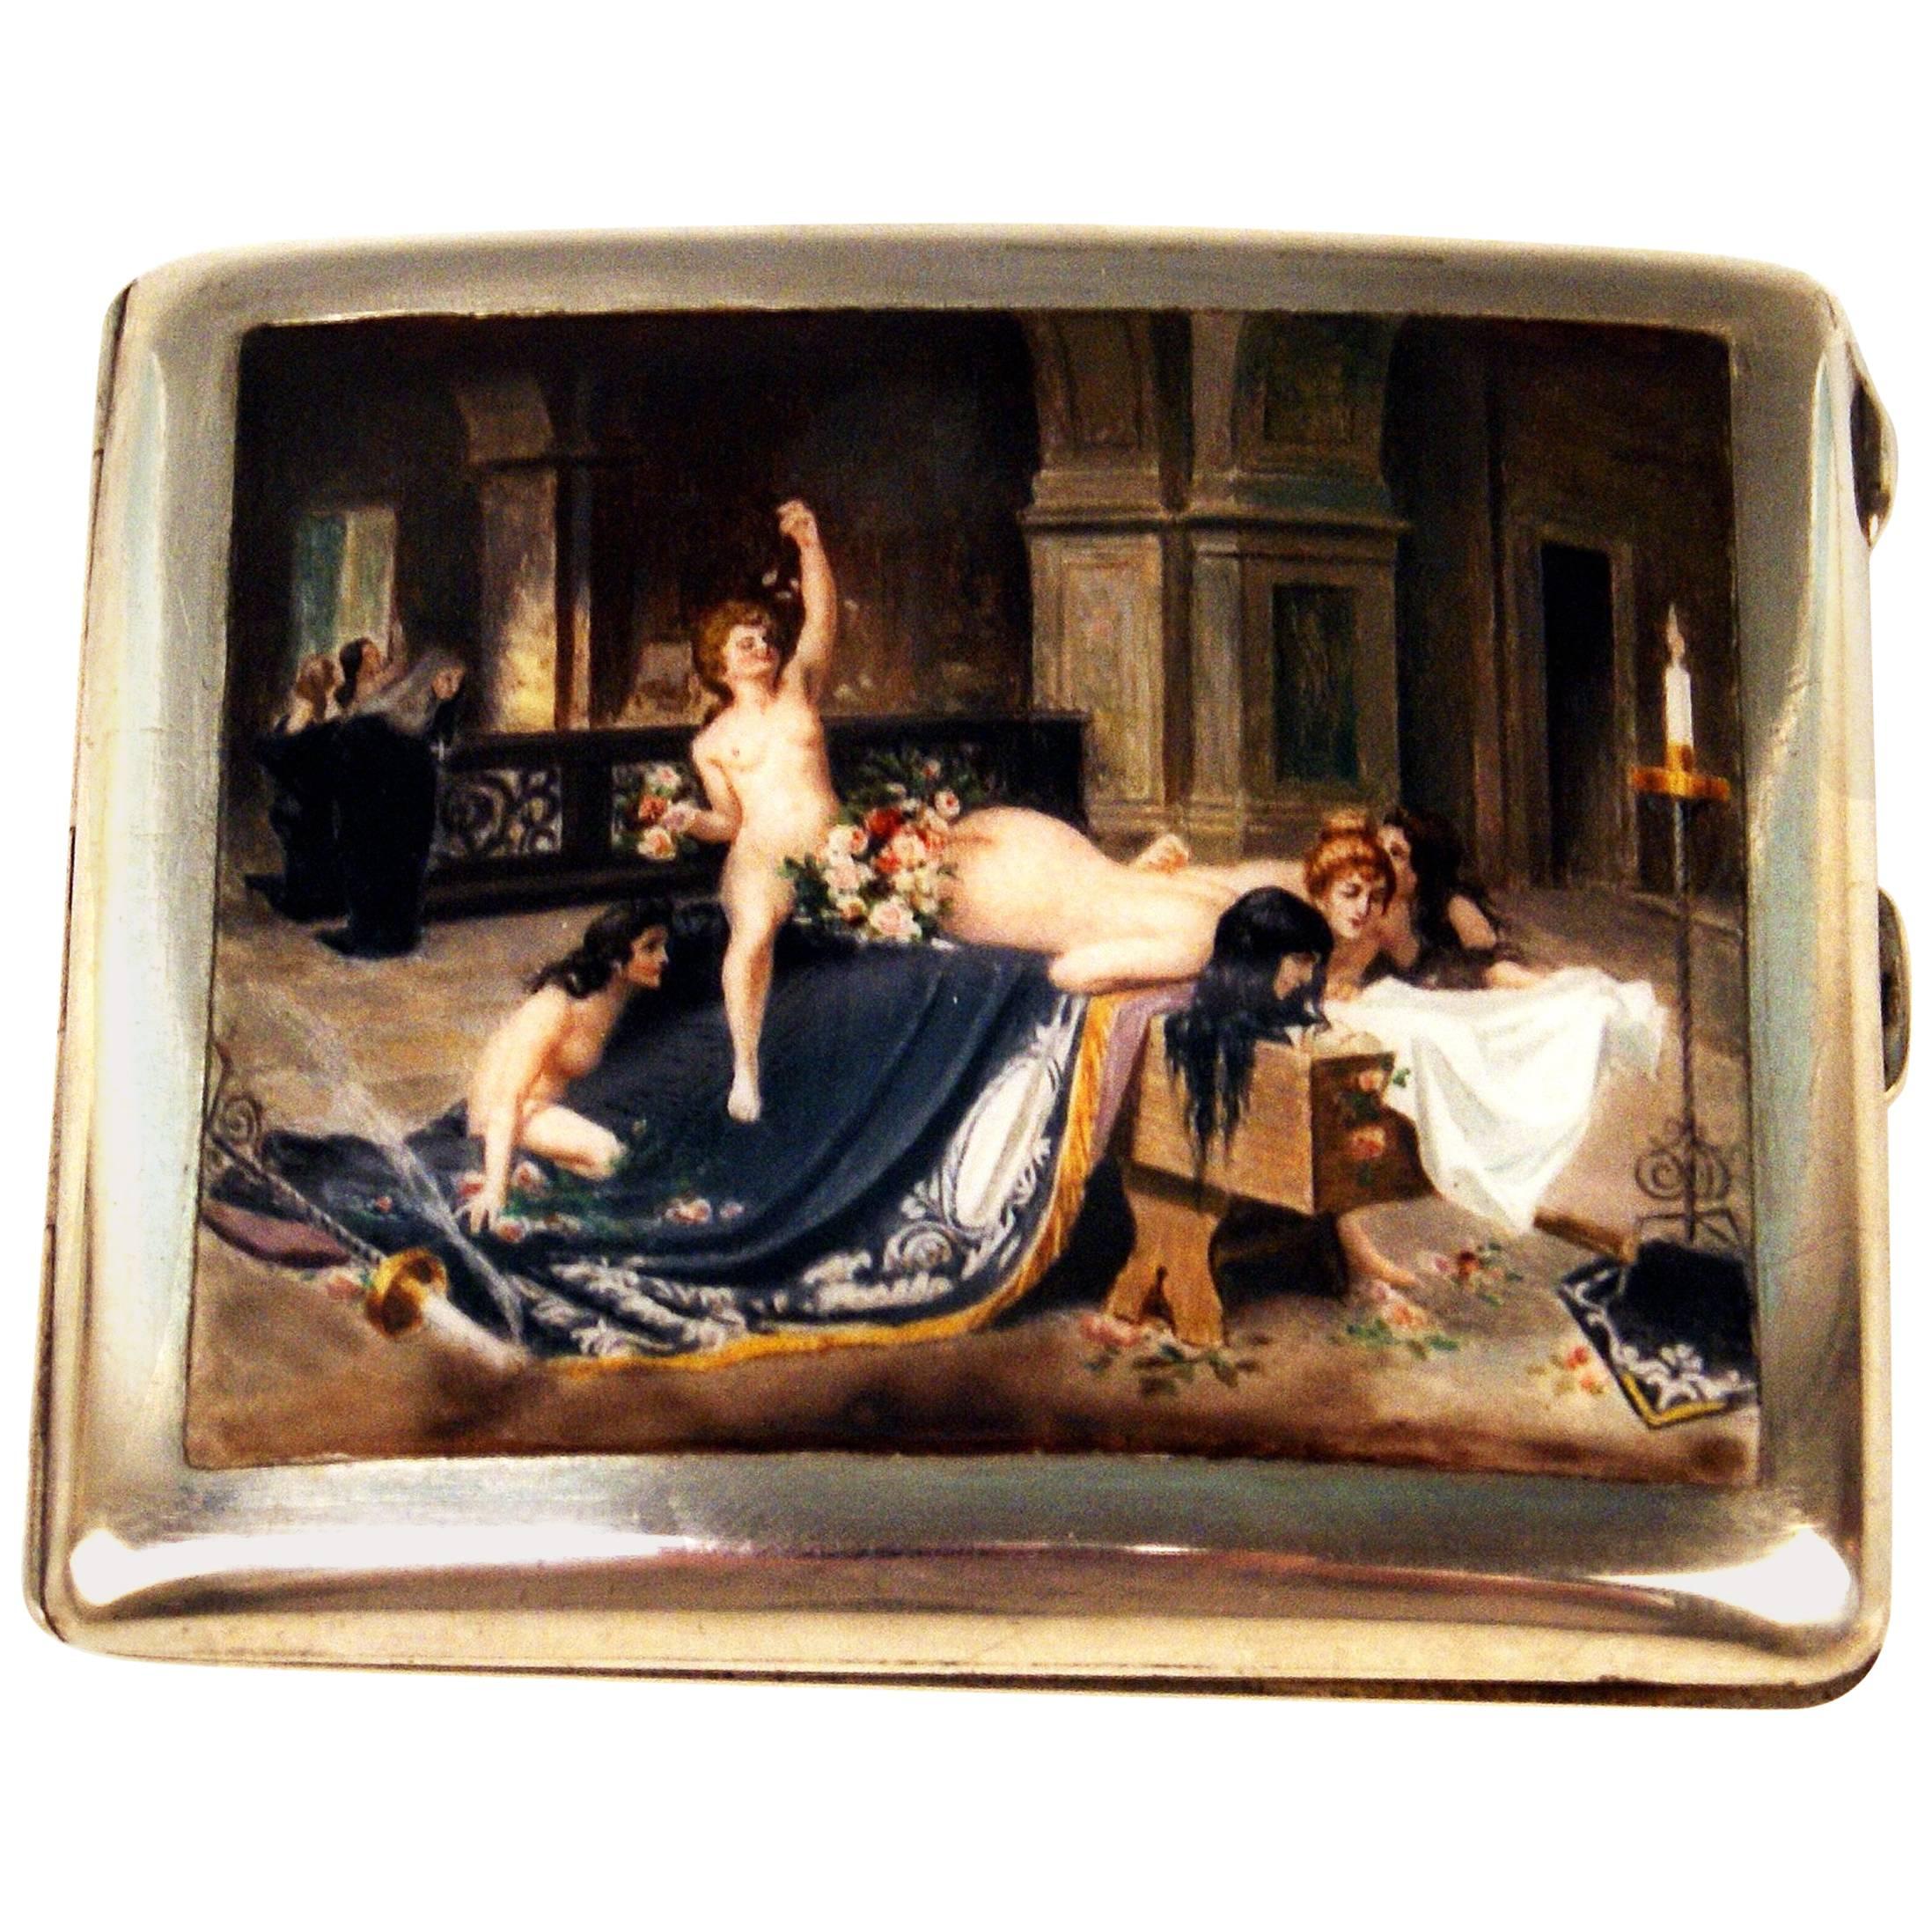 Silver 800 Erotica Cigarette Case Enamel Painting Lady Nudes in Church